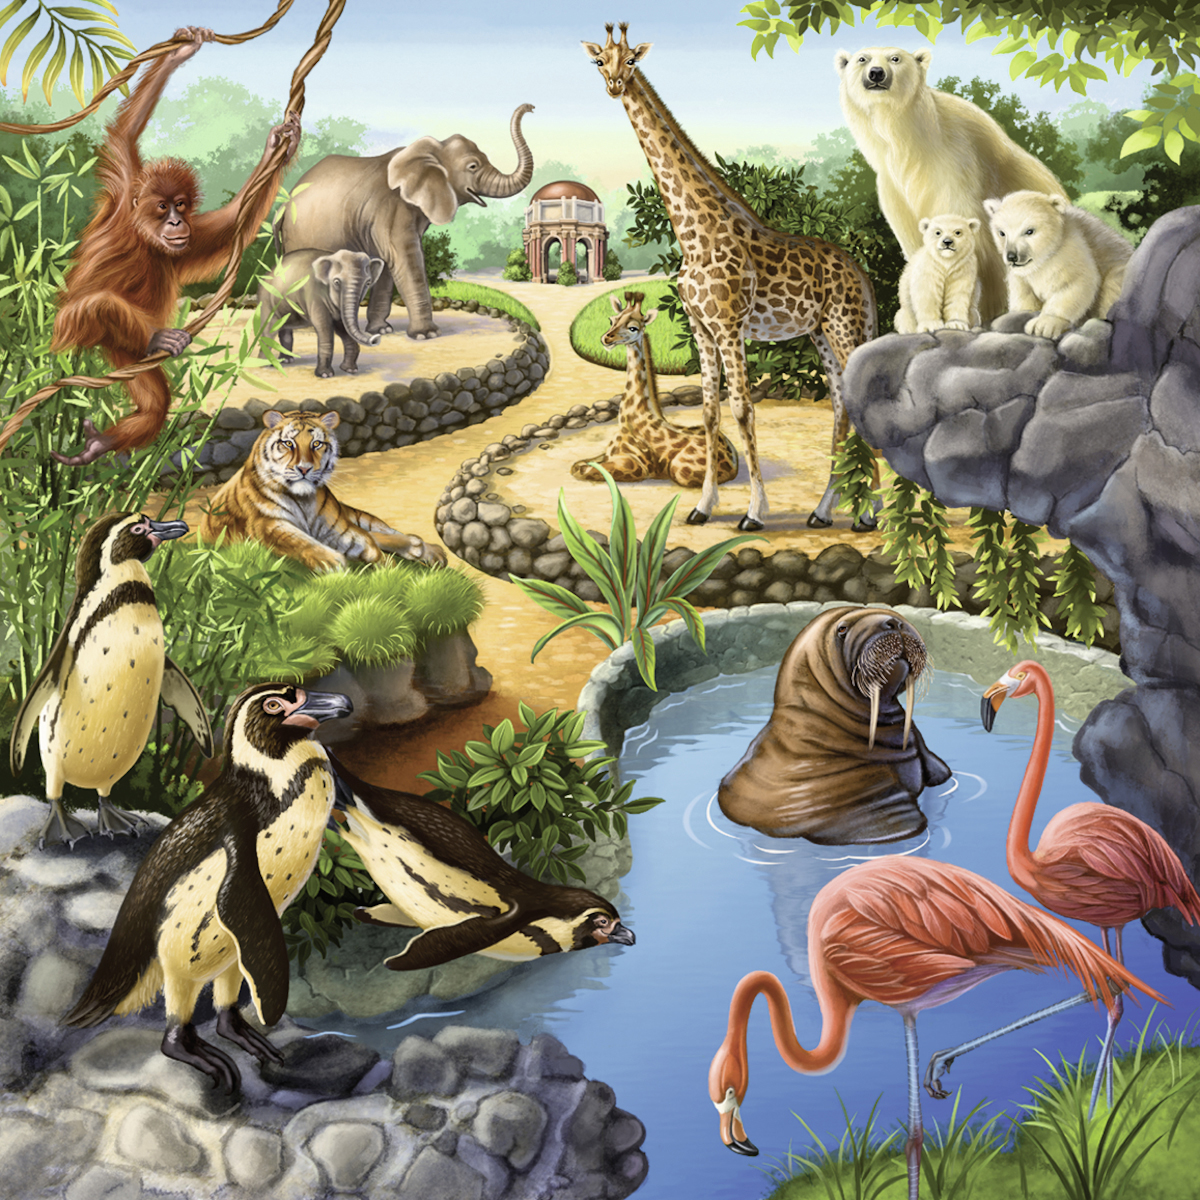 RAVENSBURGER 092659 Wald-/Zoo-/Haustiere